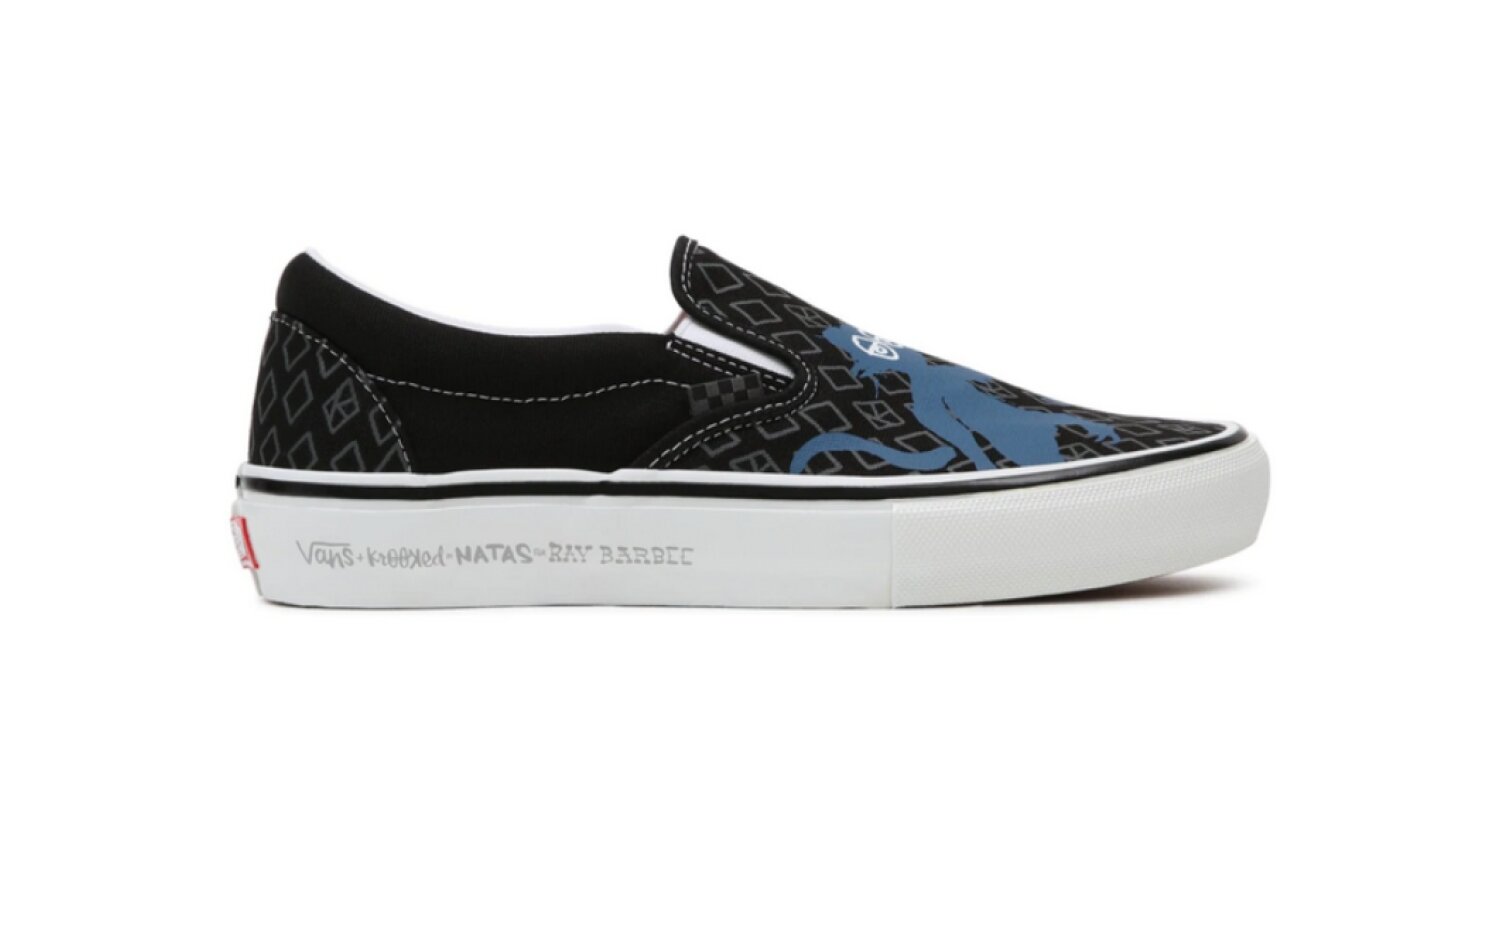 Vans Skate Slip-on Krooked By Natas For Ray (VN0A5FCAAPM)